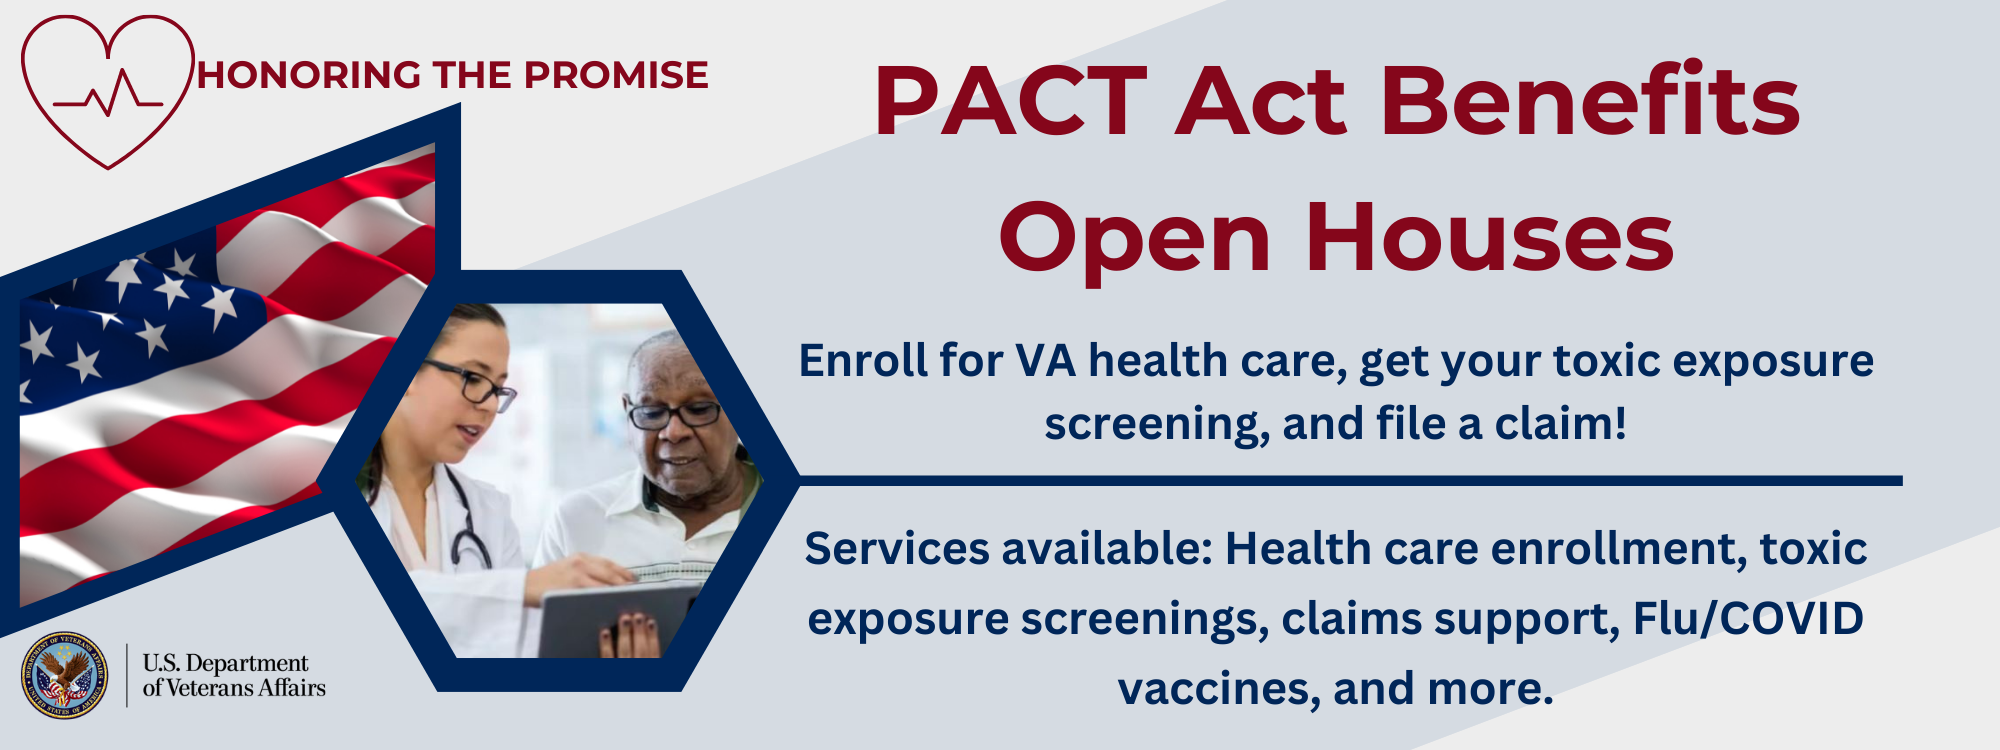 PACT Act Benefits Open House Informational Graphic